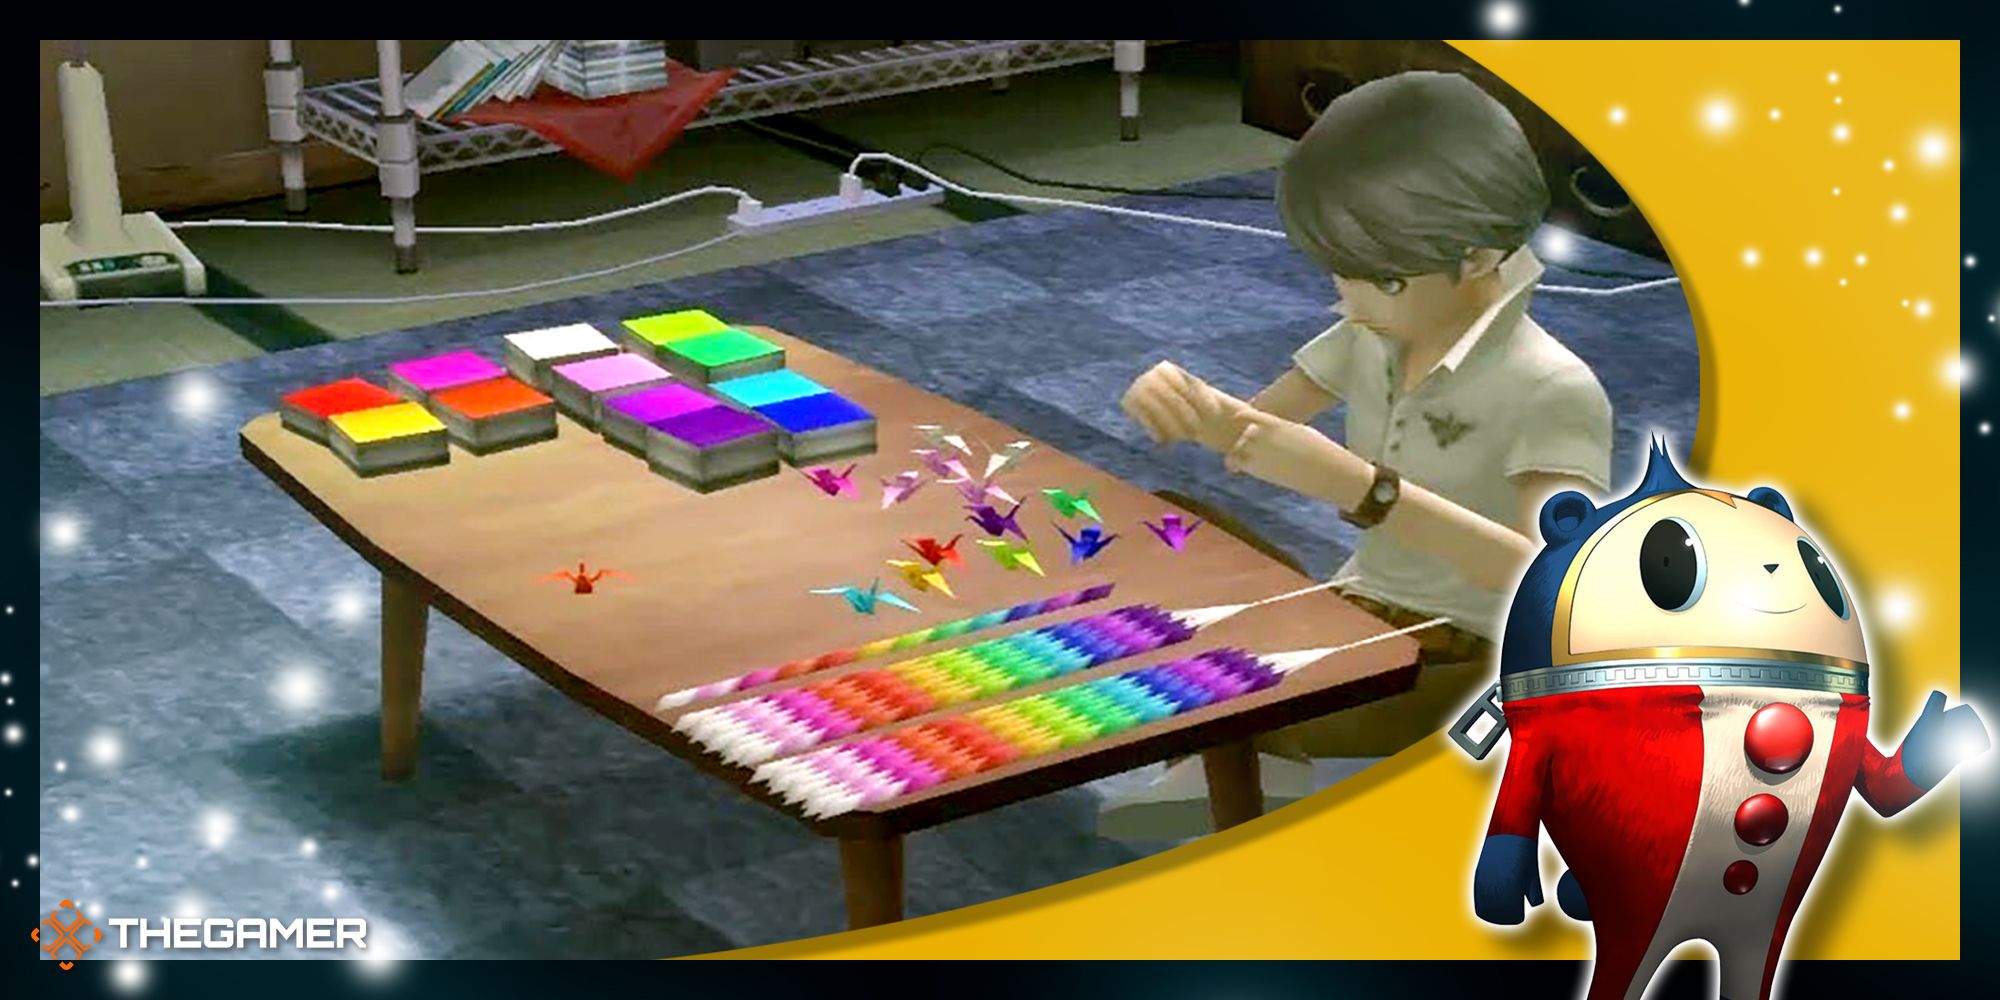 Yu folding origami cranes in his room in a gold Persona 4 Golden frame